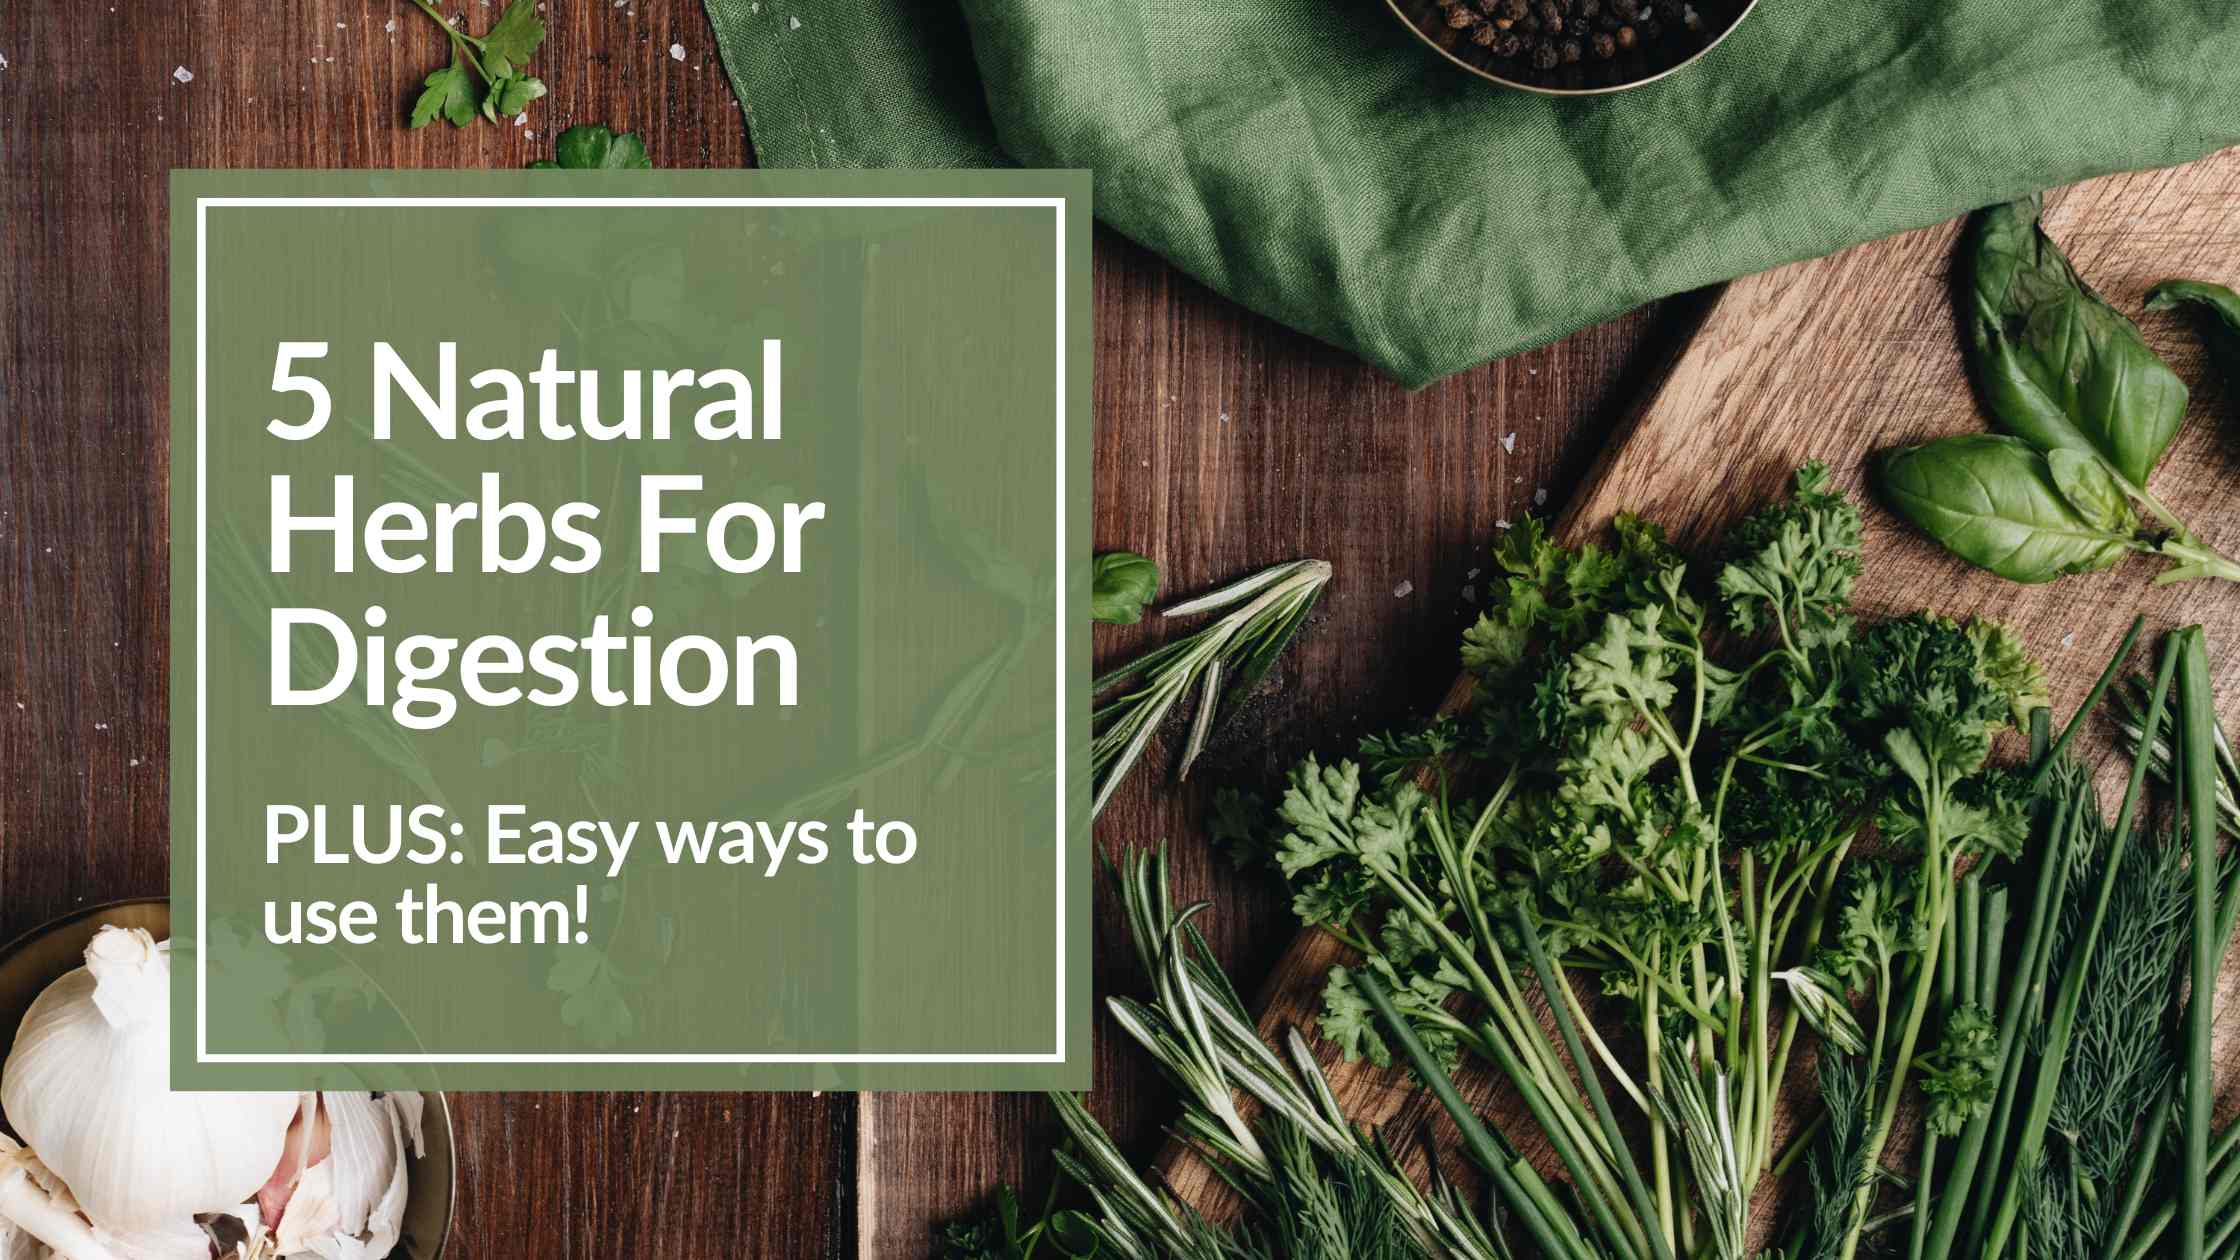 5 Natural Herbs For Digestion